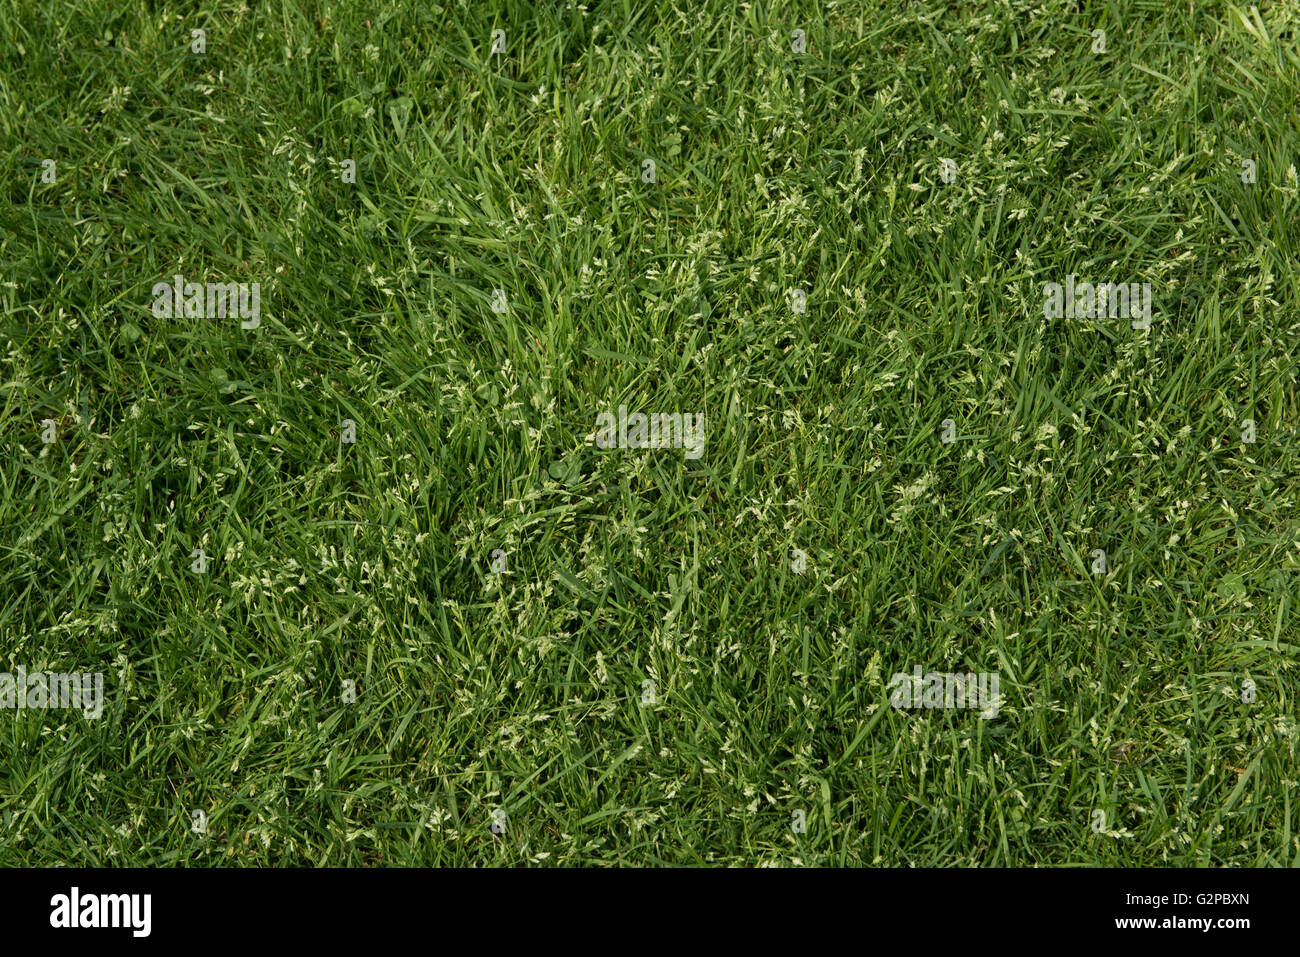 Meadow grass, Poa sp., stunted grasses coming into flower in a garden lawn Stock Photo